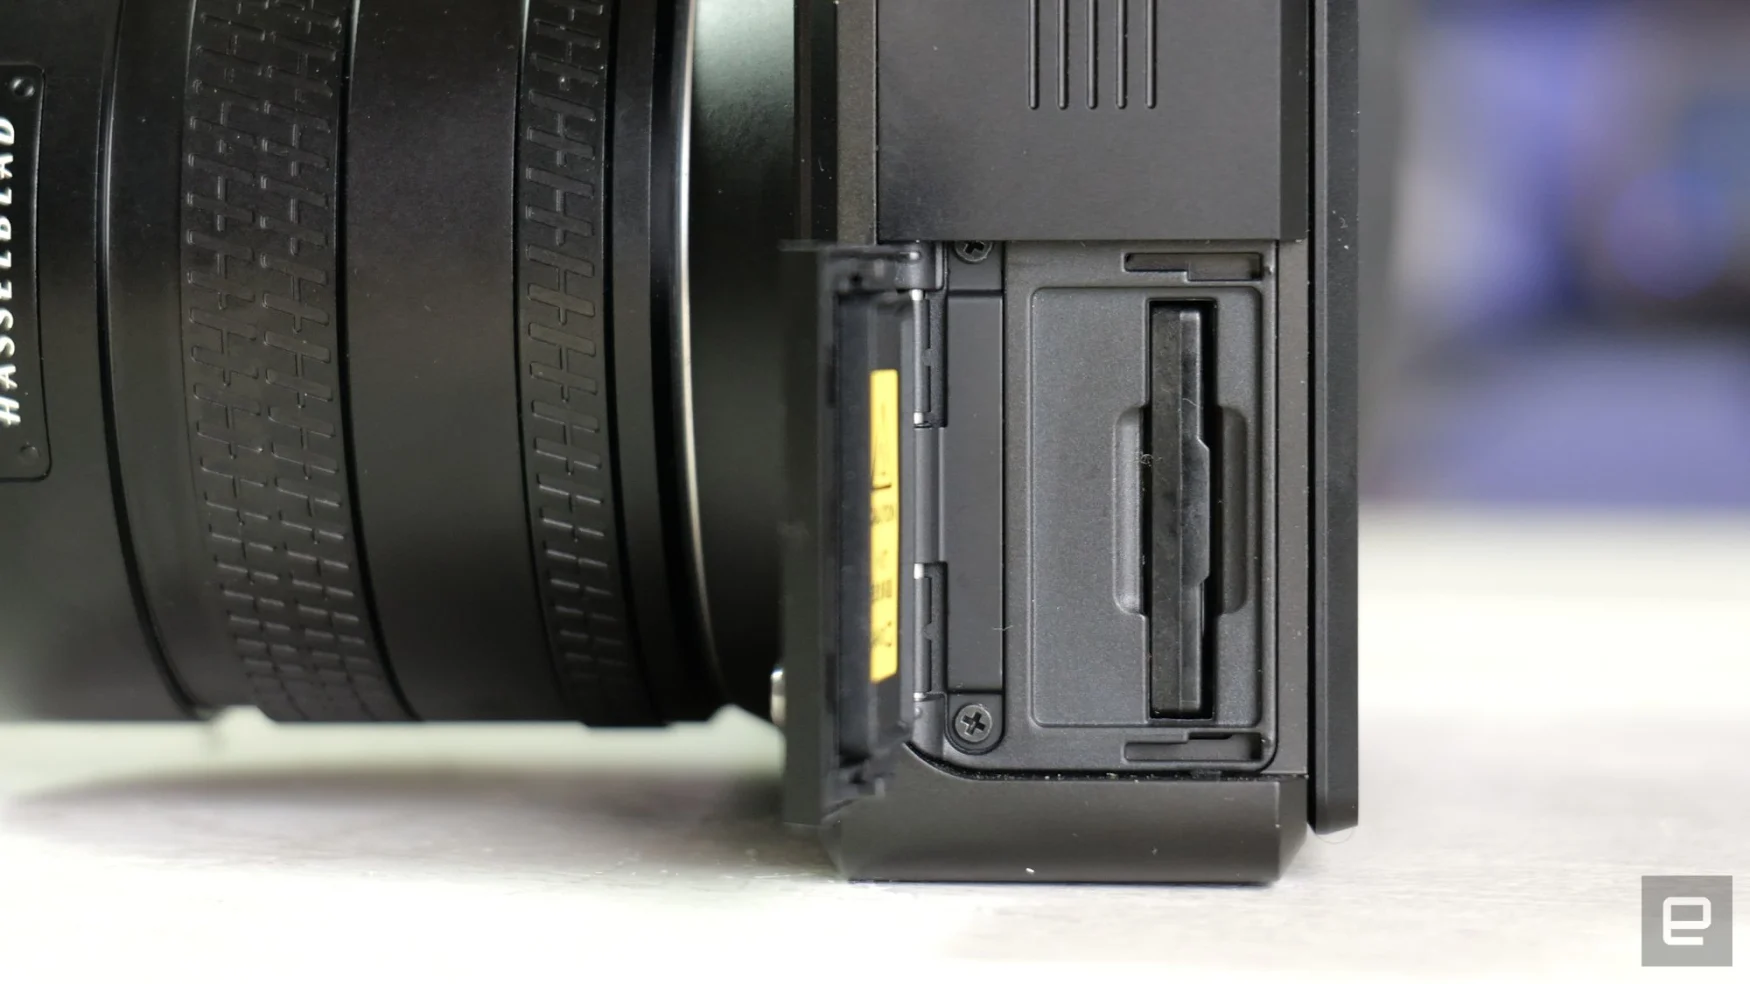 Hasselblad X2D 100C: Incredible precision and beautiful flaws